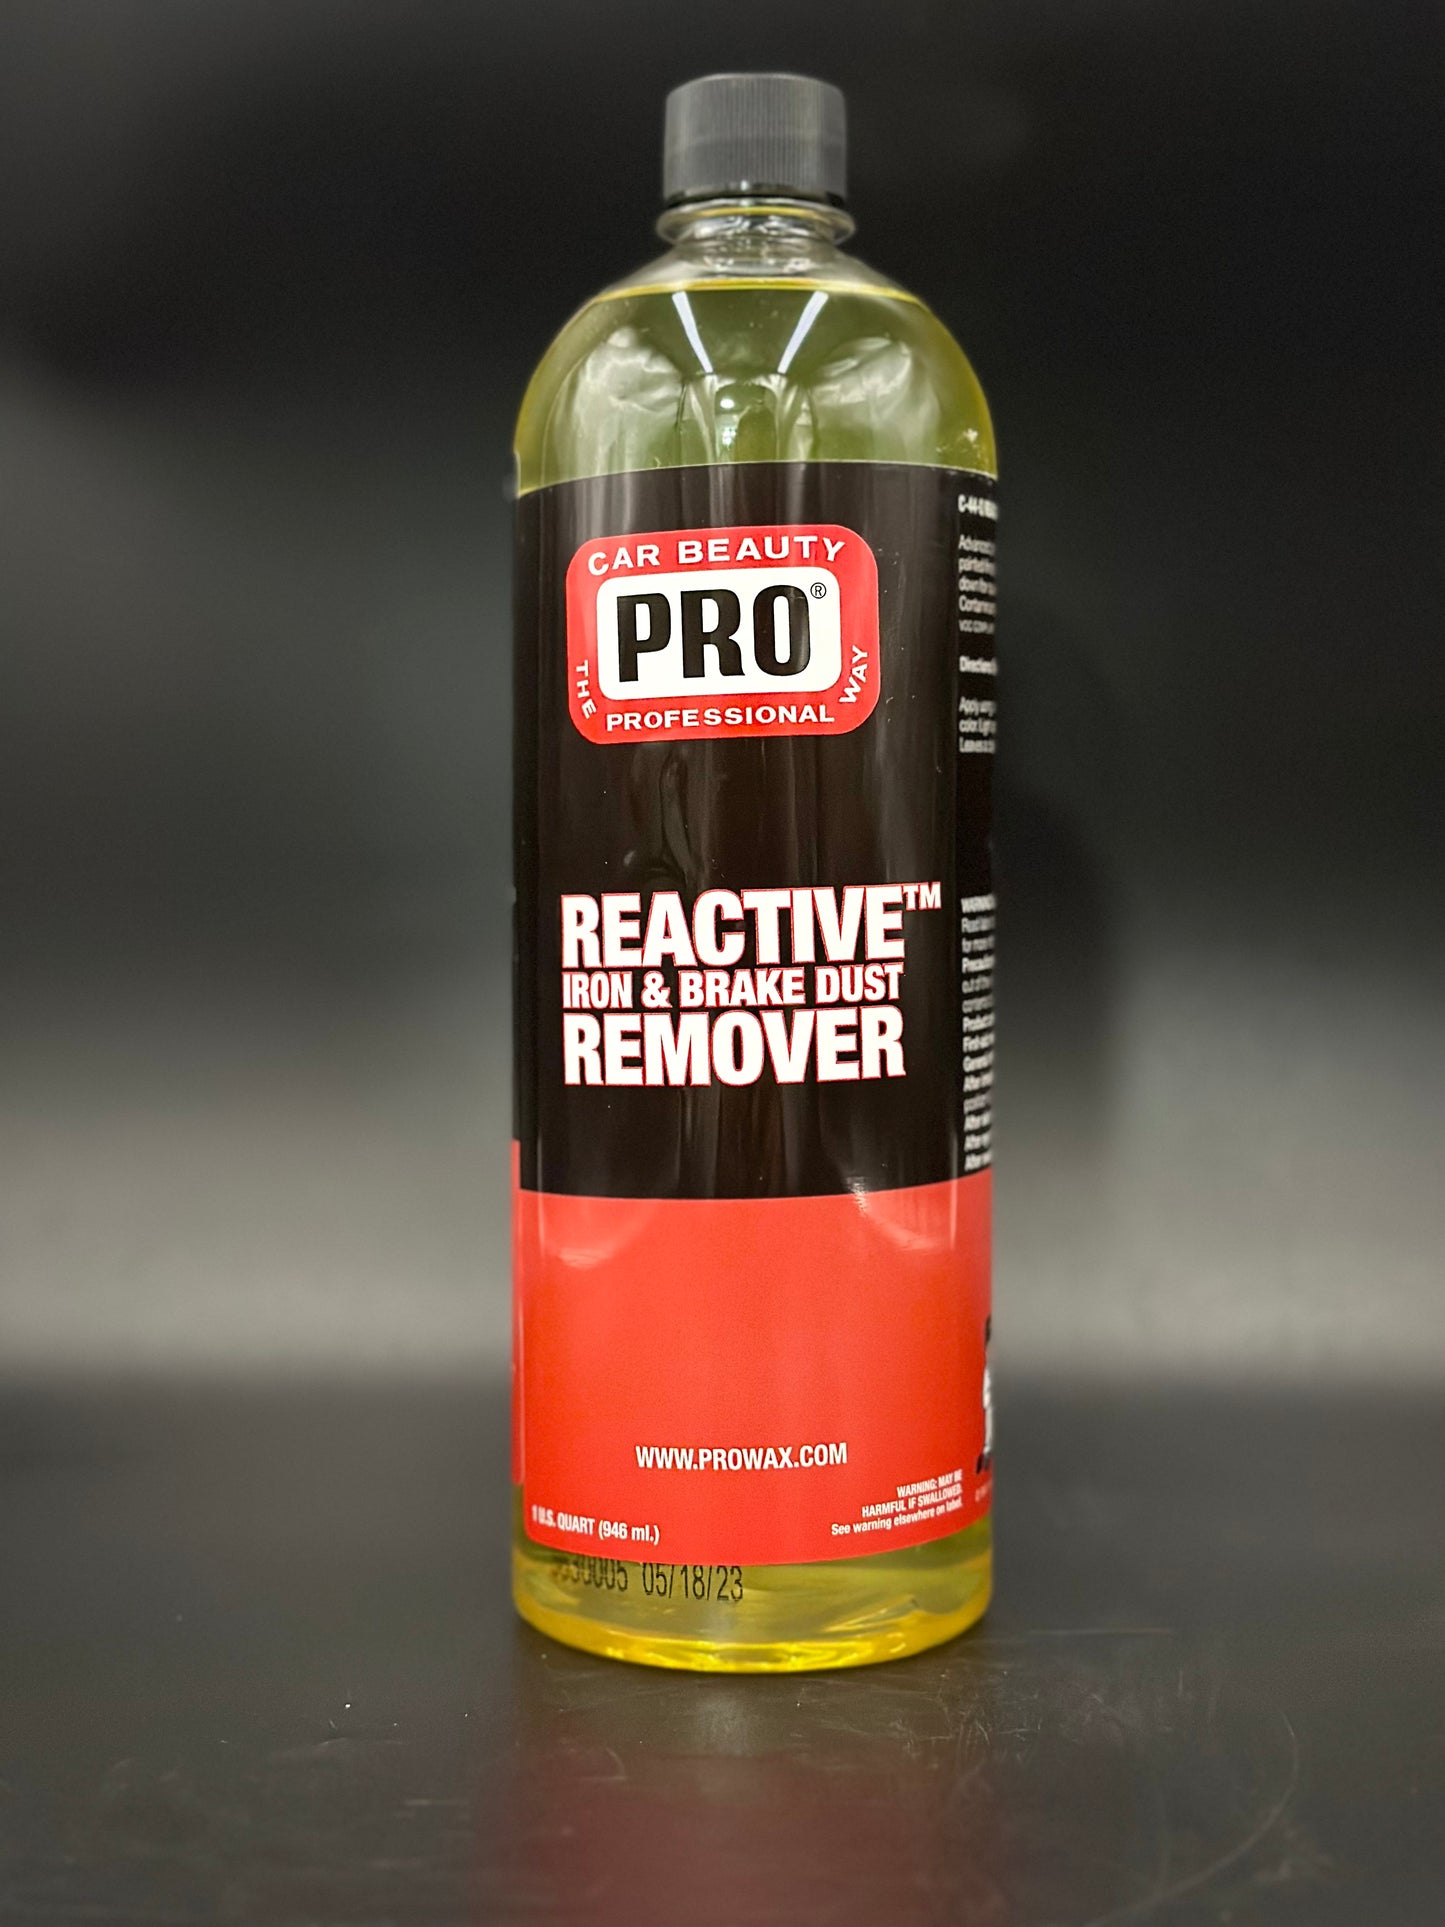 Pro - REACTIVE™ IRON & BRAKE DUST REMOVER - C44 – Complete Detail Solutions